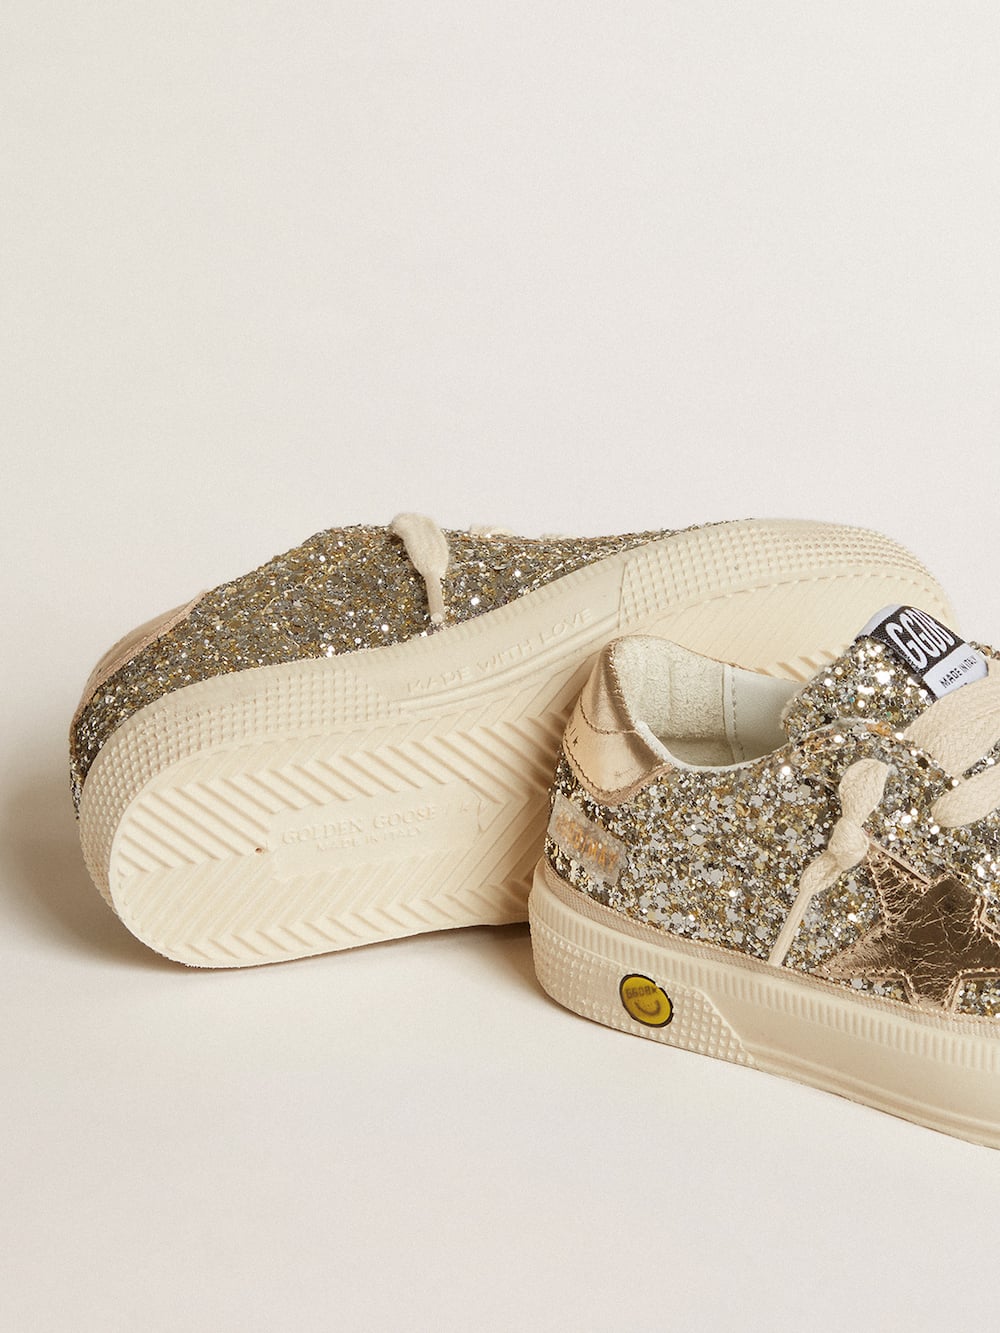 Golden Goose - May Junior in platinum glitter with metallic leather star and heel tab in 